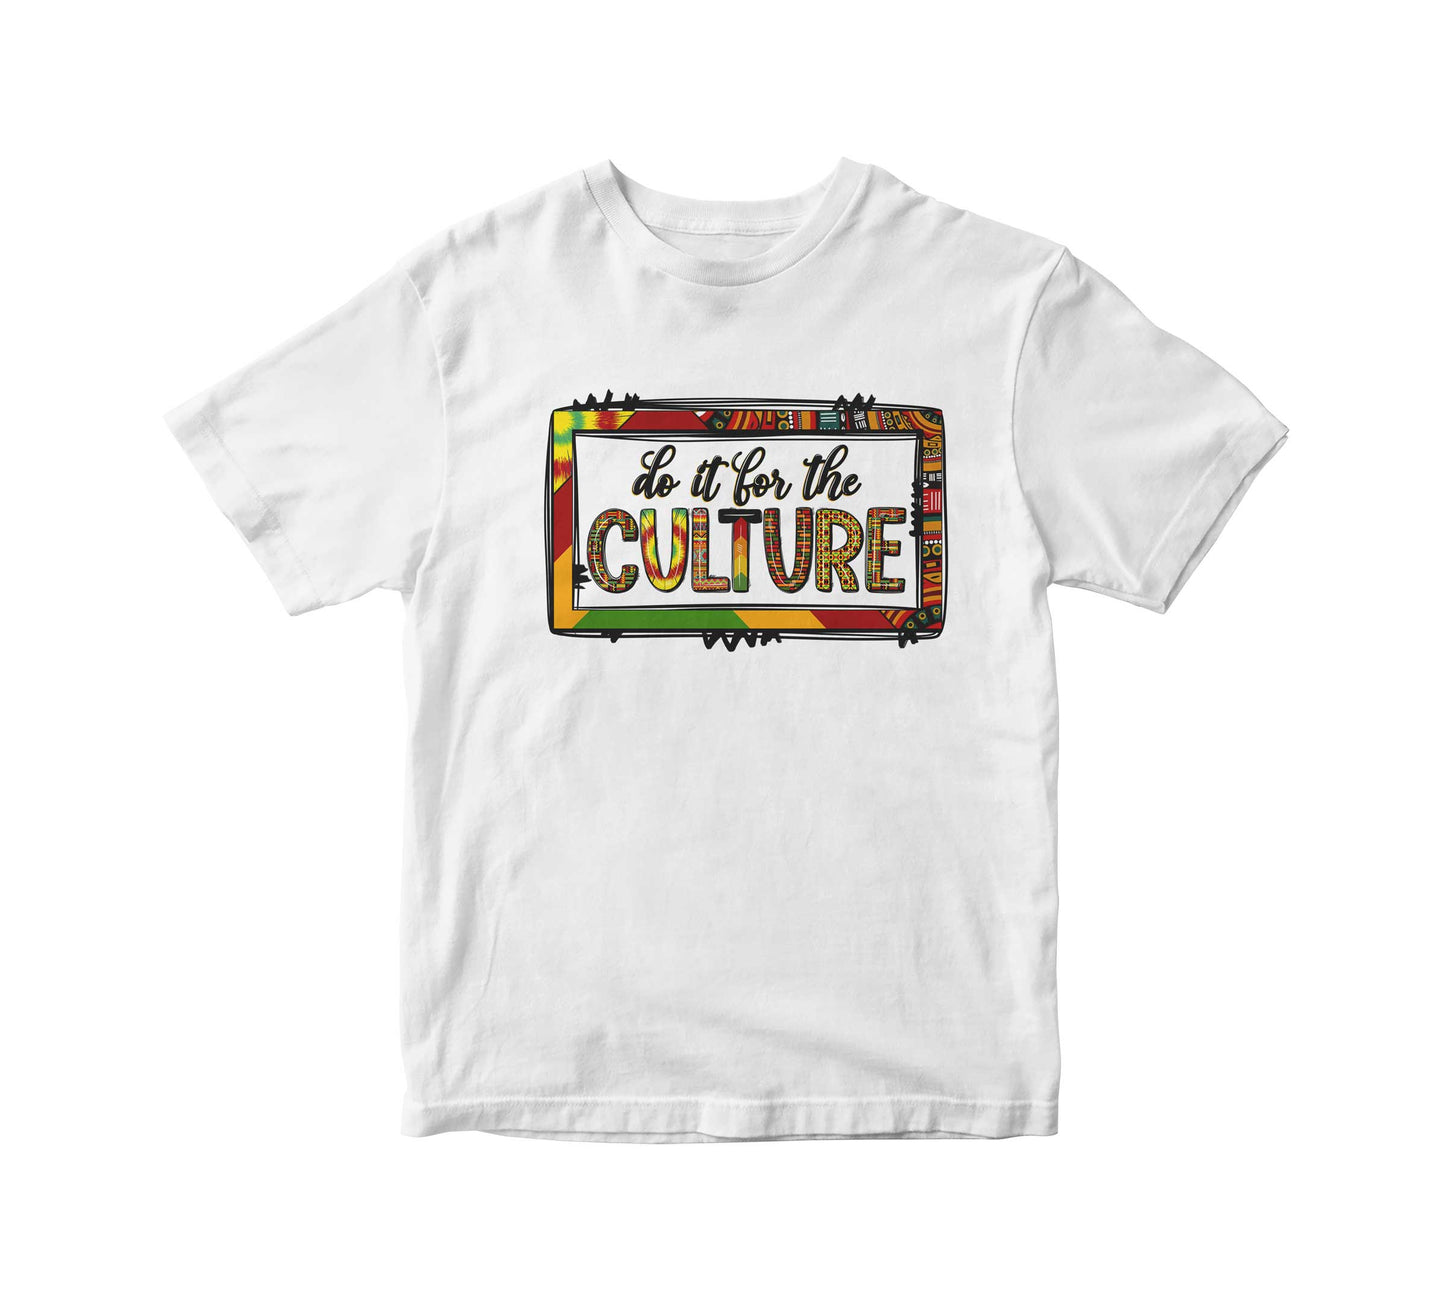 Do It For The Culture Adult Unisex T-Shirt